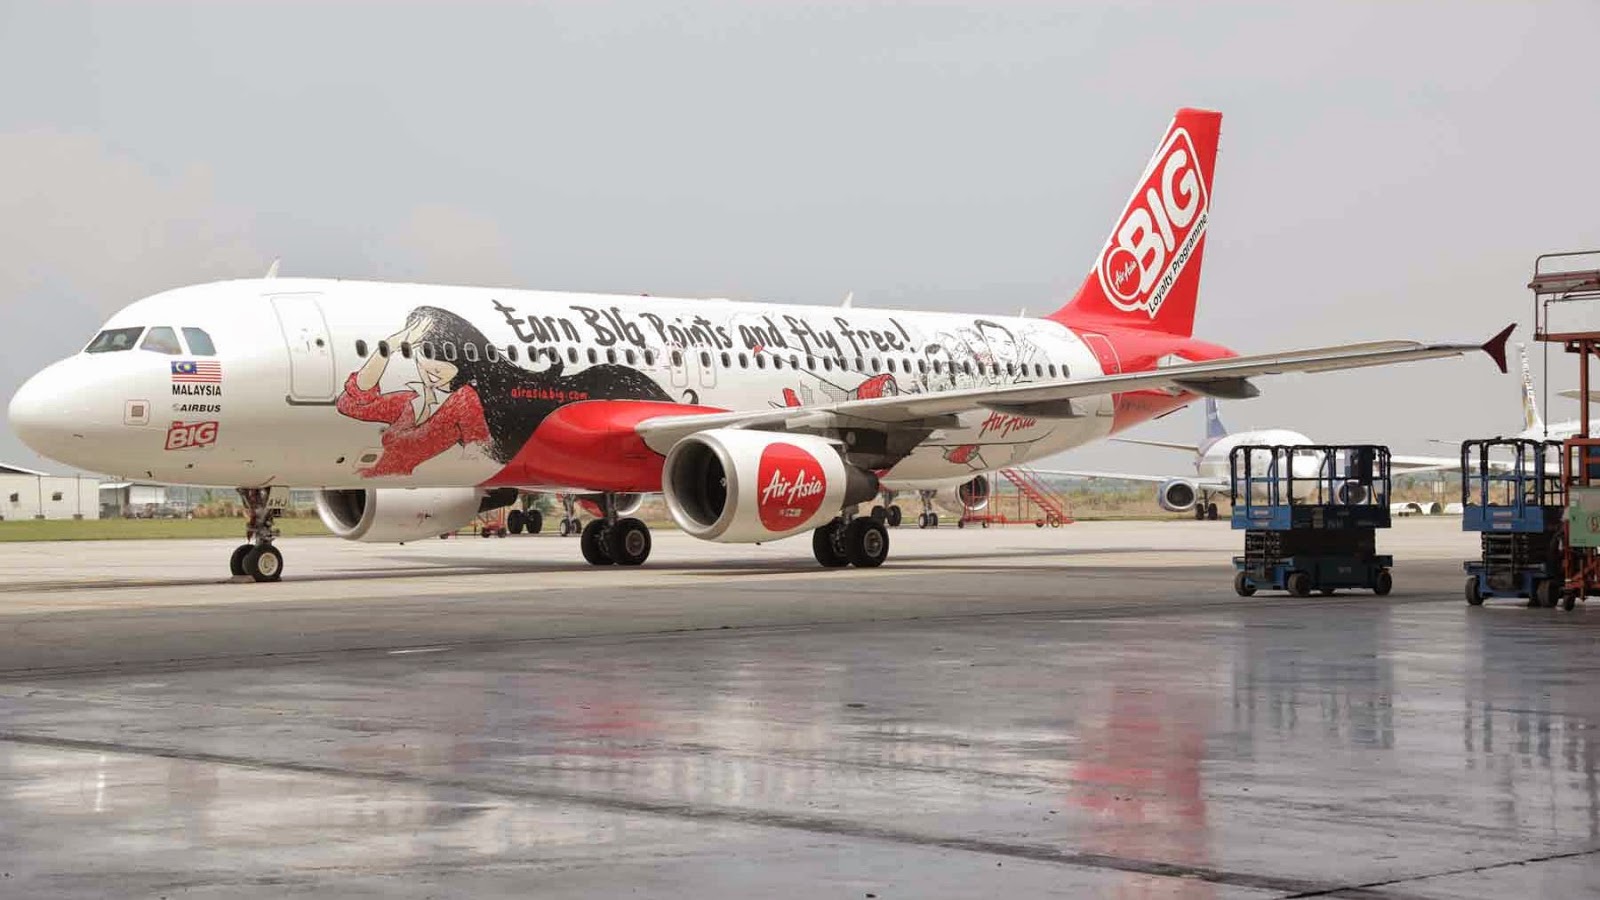 Travelholic: Big Plane Project and Air Asia BIG's 1st Livery Launch